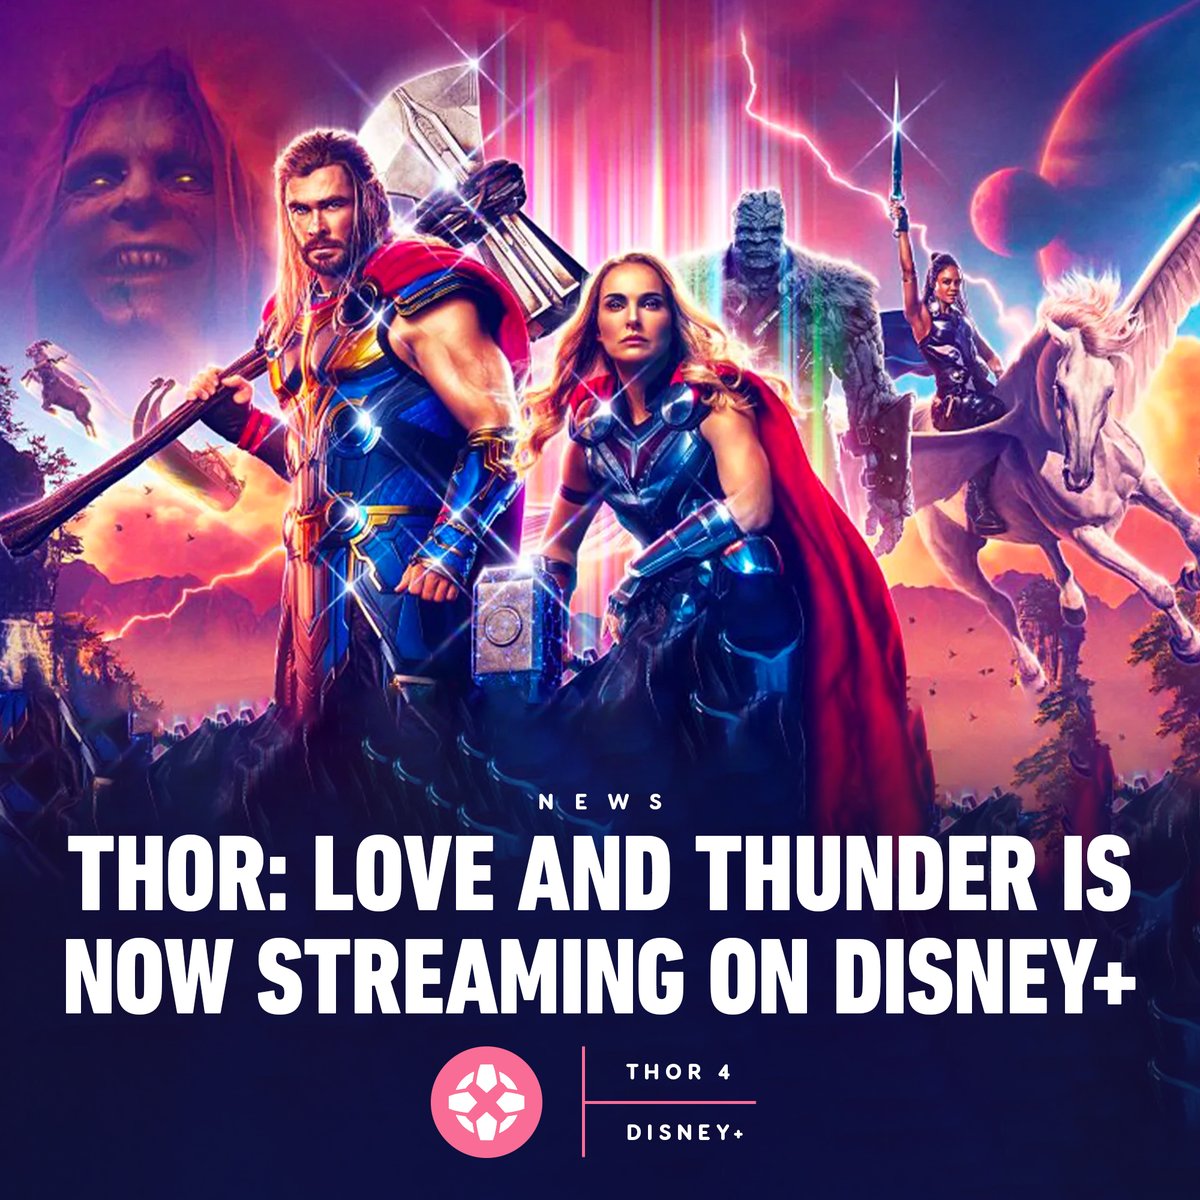 RT @IGN: Thor: Love and Thunder, the fourth film in the Thor franchise, is now streaming on Disney+. https://t.co/qb4R5BT53i